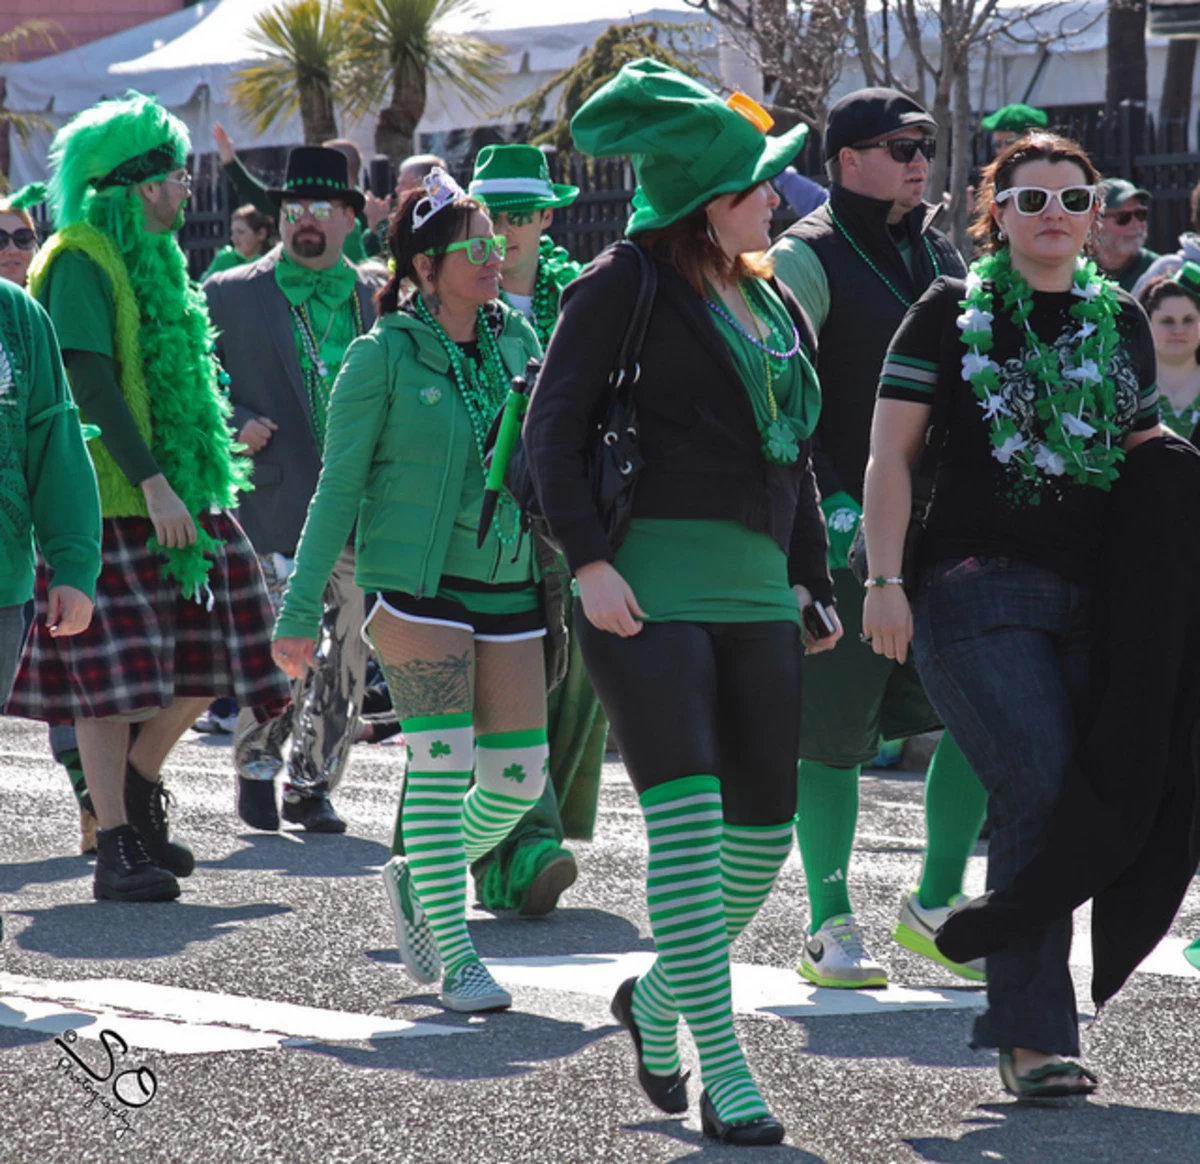 Everything You Need To Know About The Ocean County St. Patrick’s Day Parade In Seaside Heights